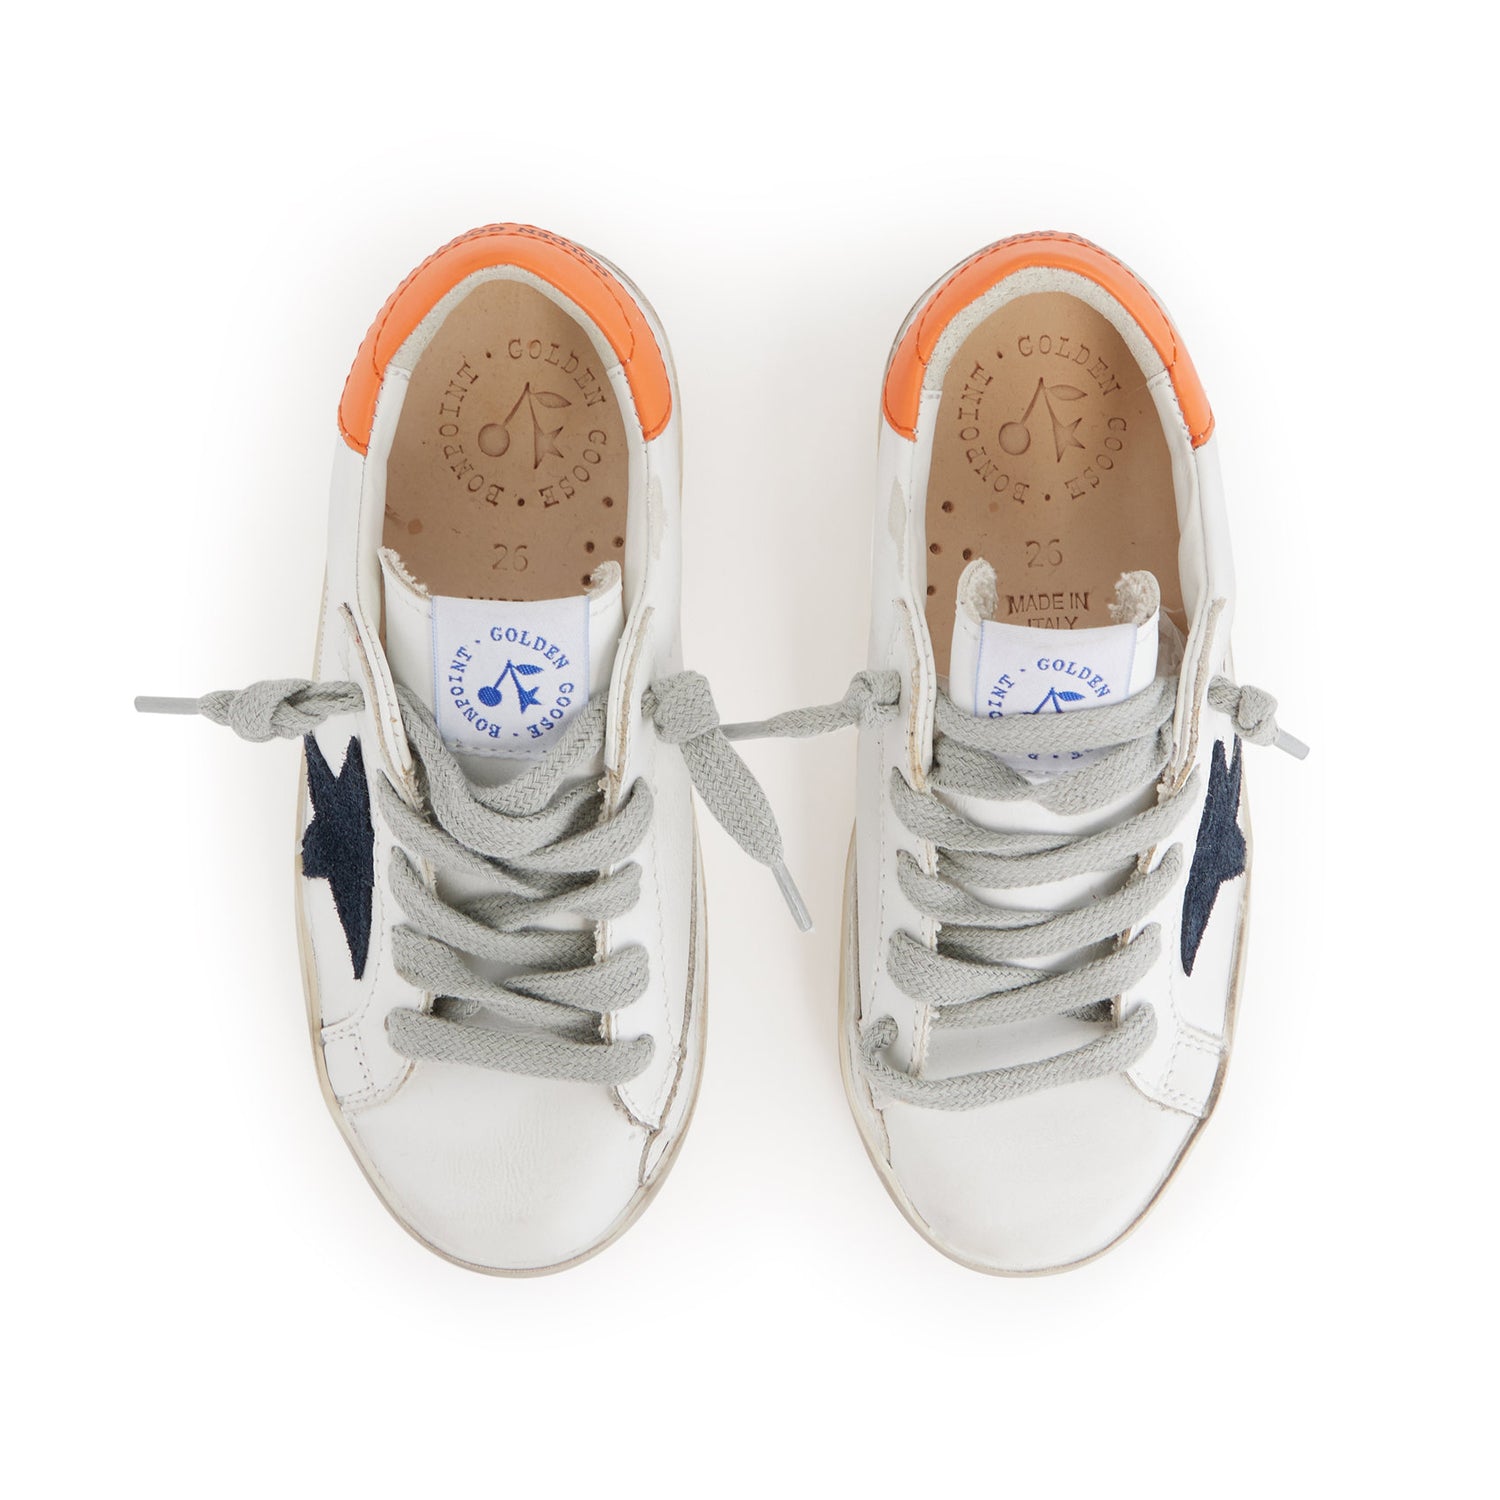 Bonpoint x Golden Goose Leather Sneakers blue | child shoes